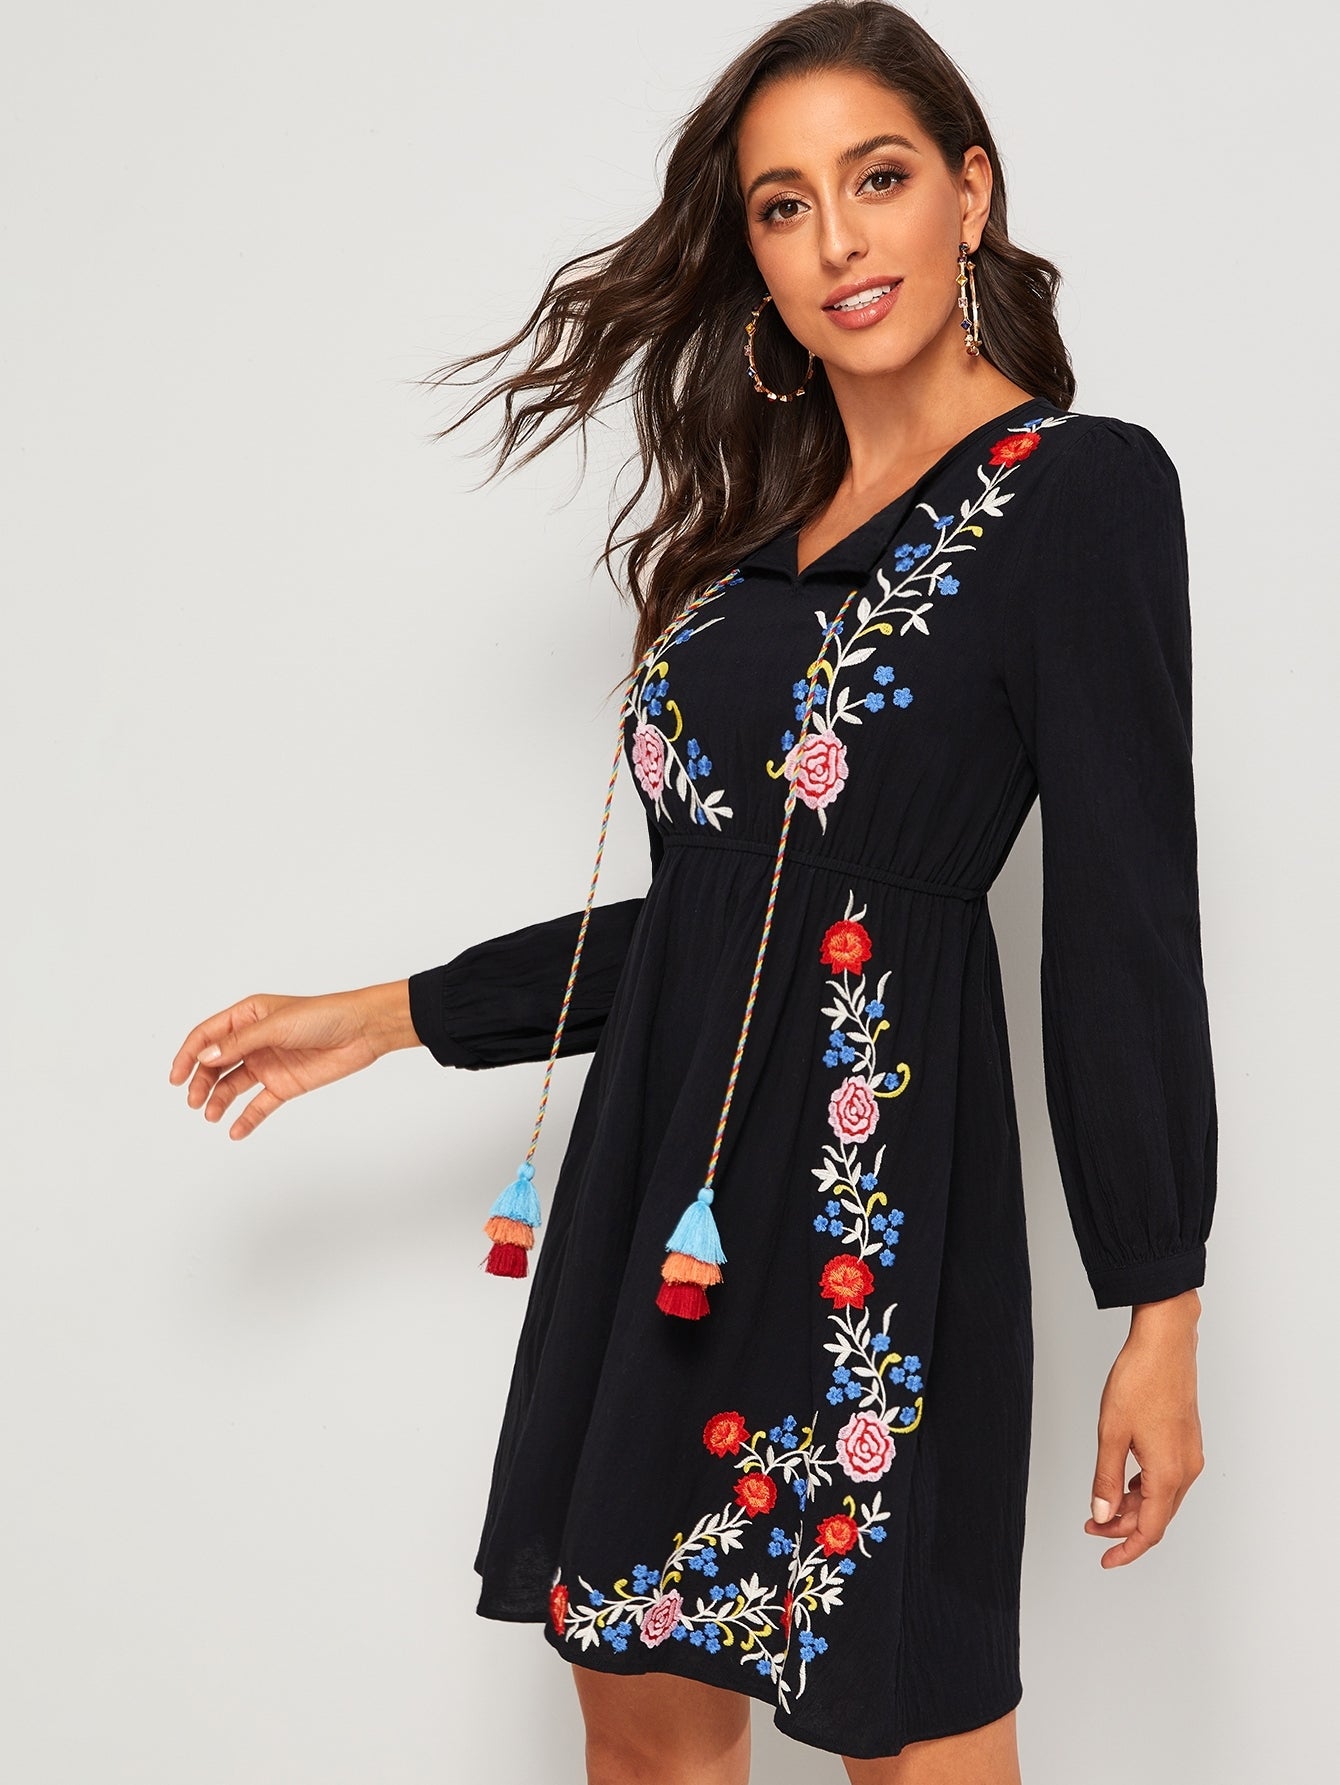 Floral Embroidery Tassel Tie Peasant Dress | Amy's Cart Singapore